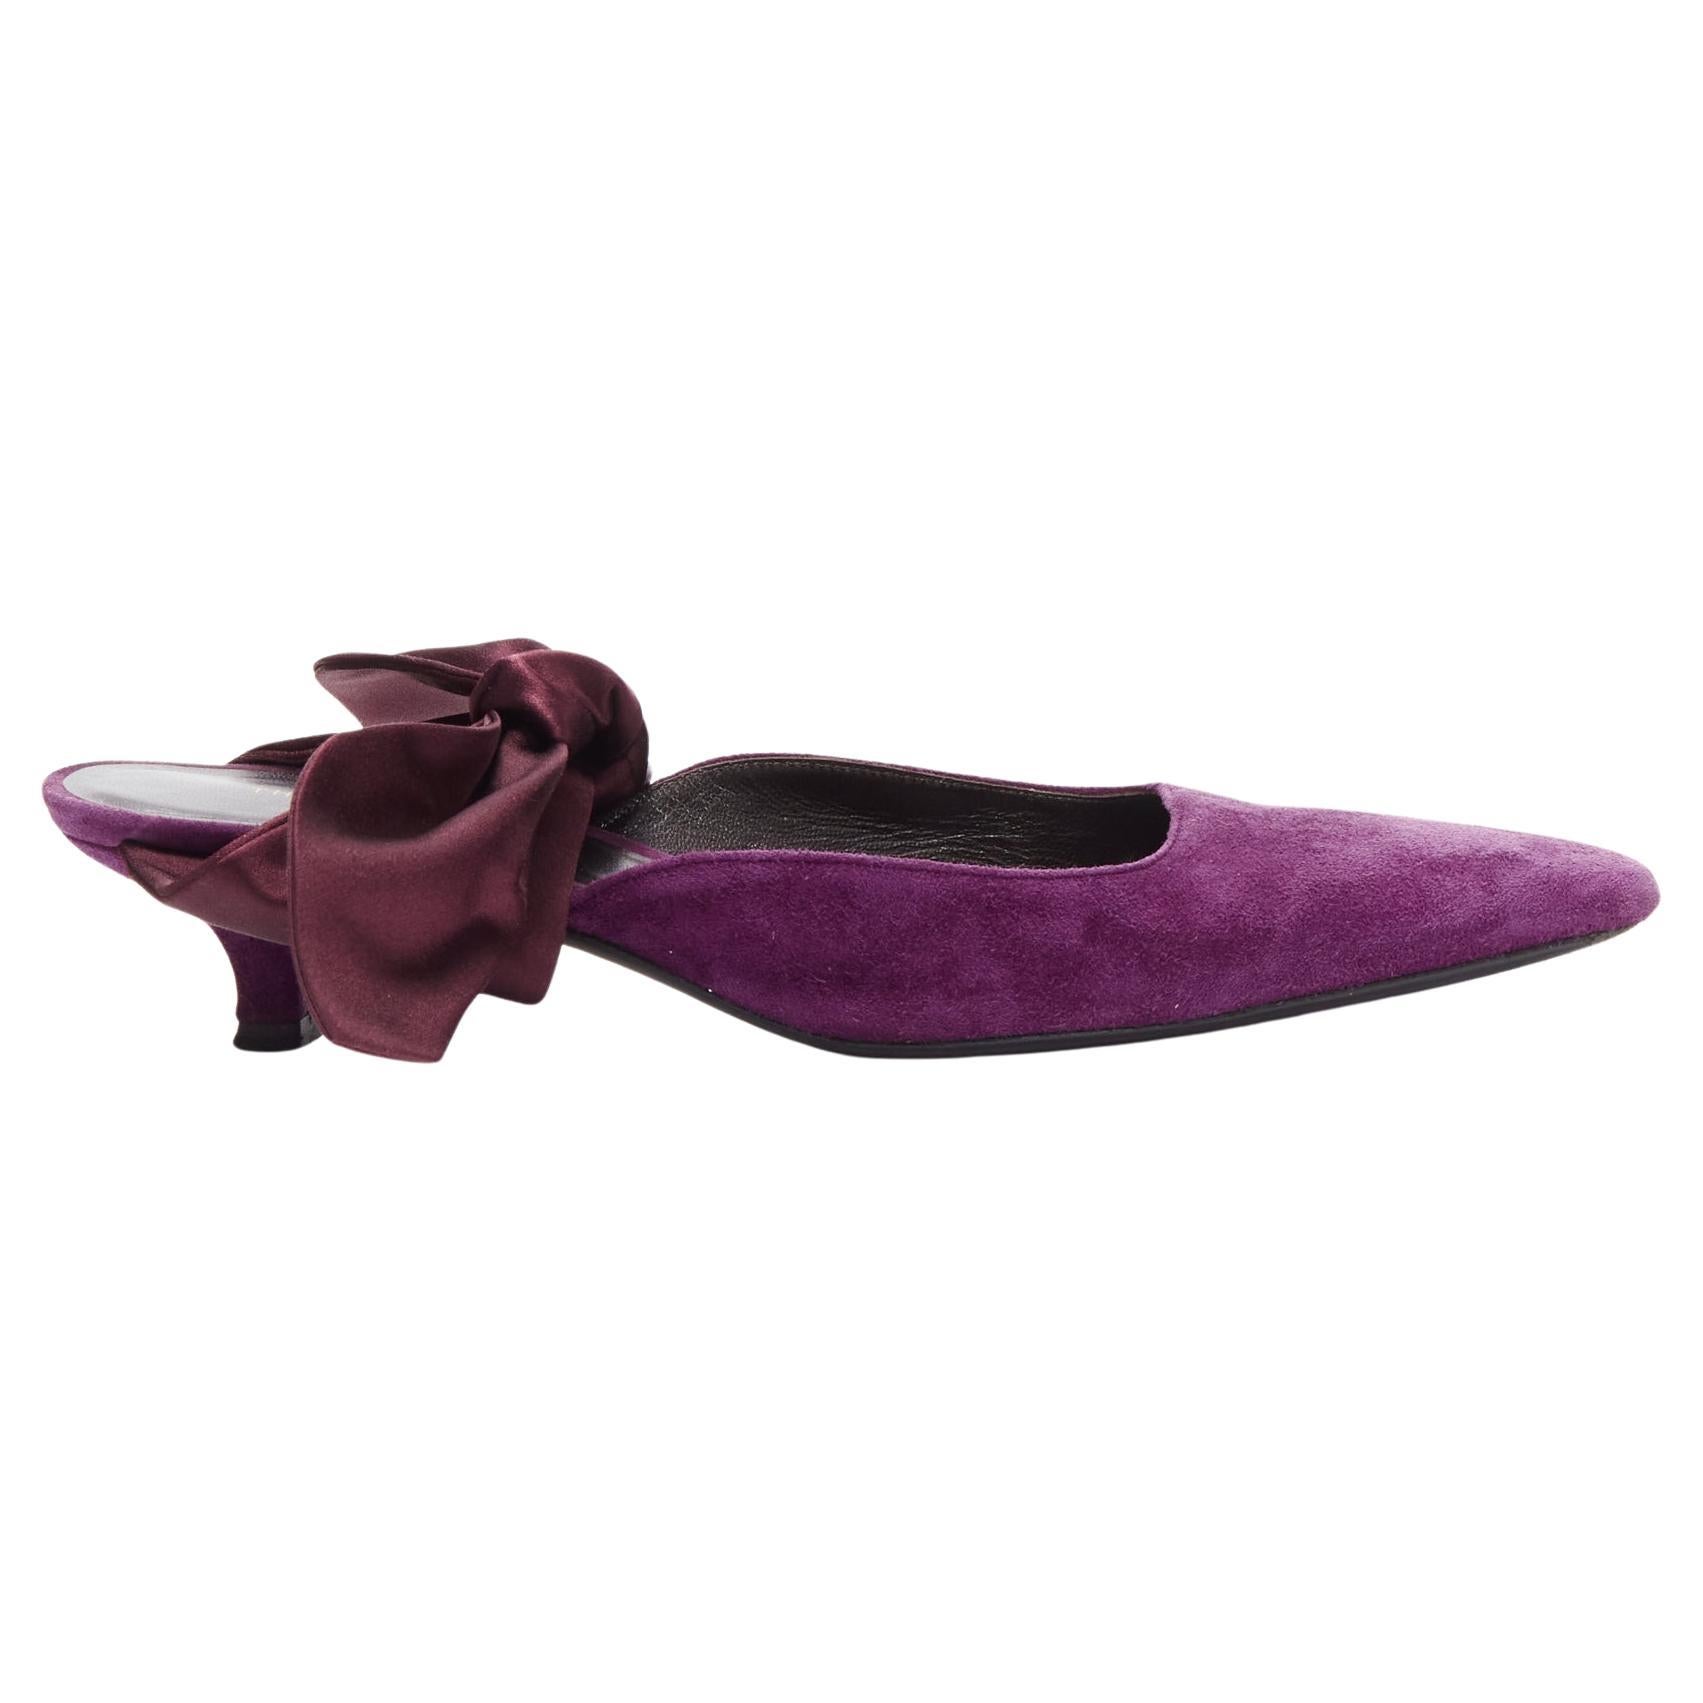 THE ROW Coco Bow purple velvet silk tie kitten mule heels EU37.5
Reference: TGAS/D00552
Brand: The Row
Designer: Mary Kate and Ashley Olsen
Model: Coco Bow
Material: Leather, Fabric
Color: Purple, Burgundy
Pattern: Solid
Closure: Self Tie
Lining: